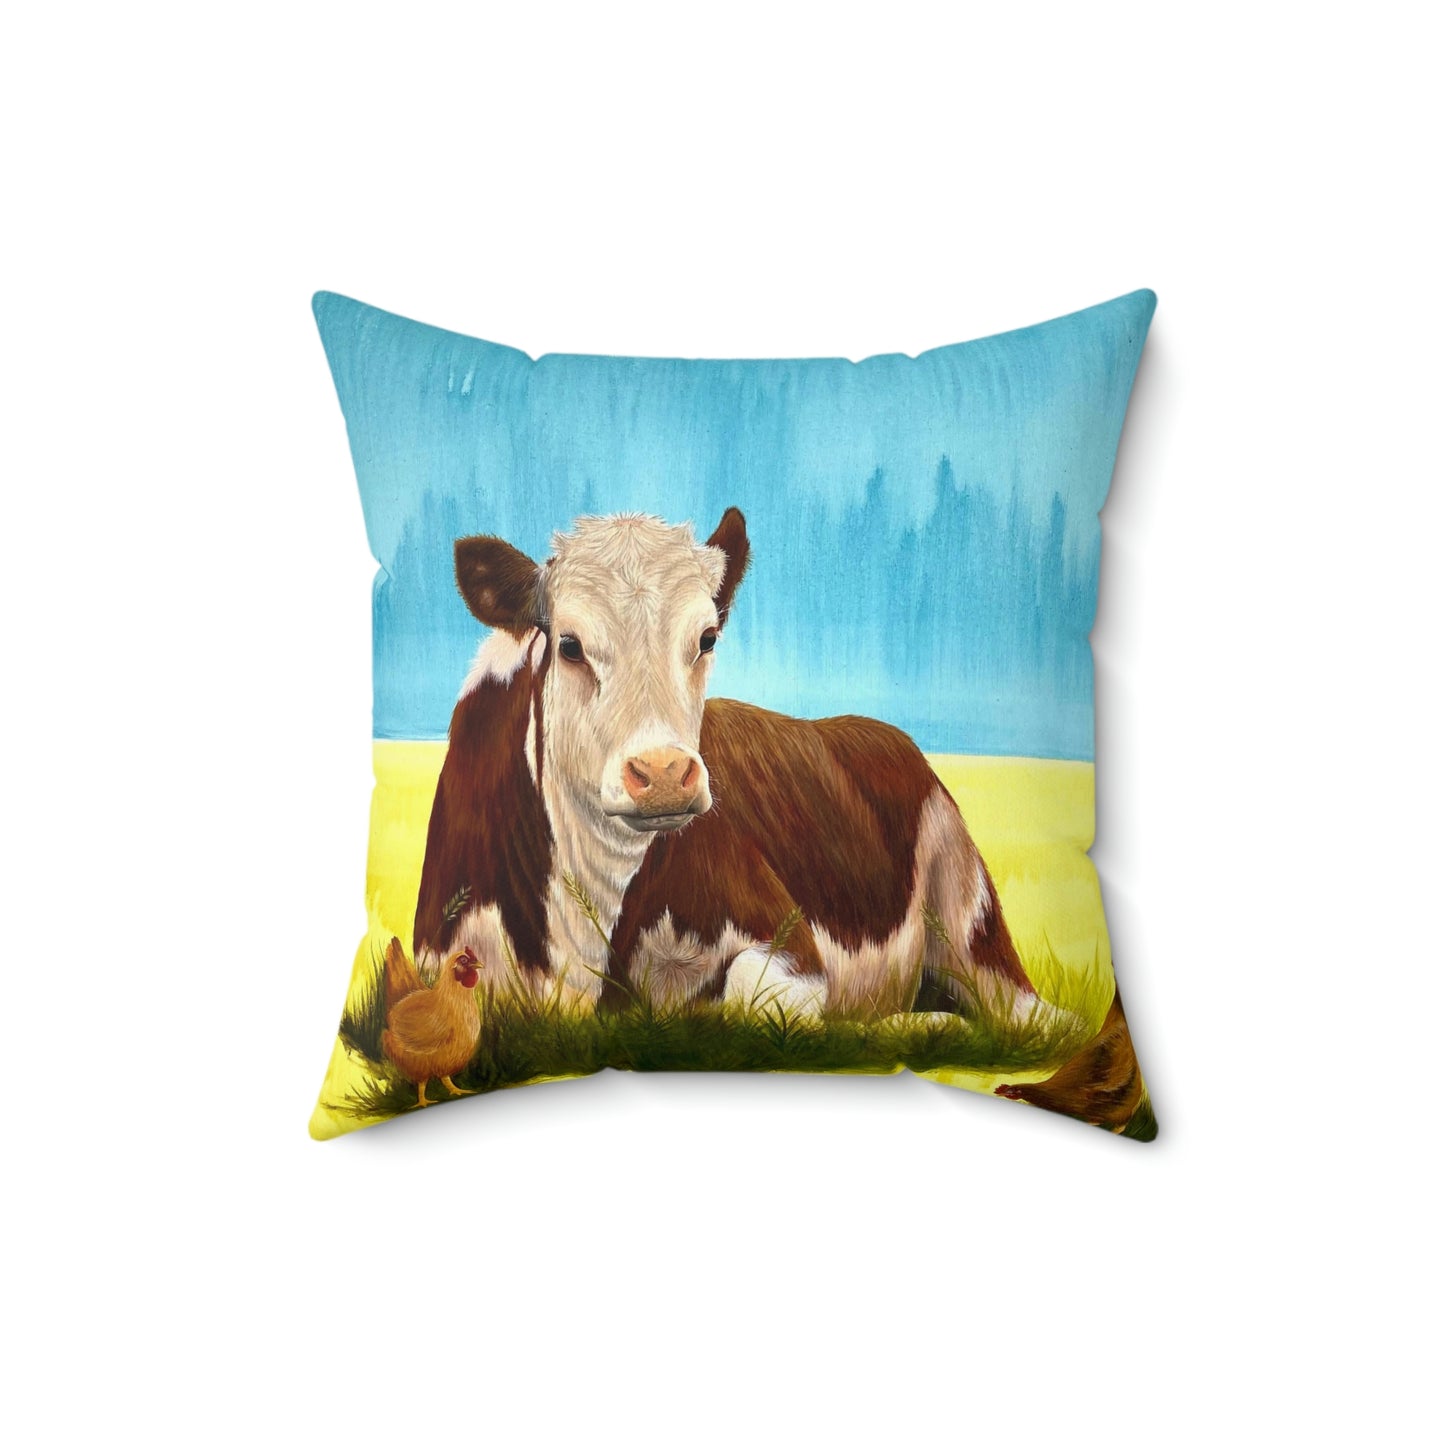 Hereford Cow Pillow